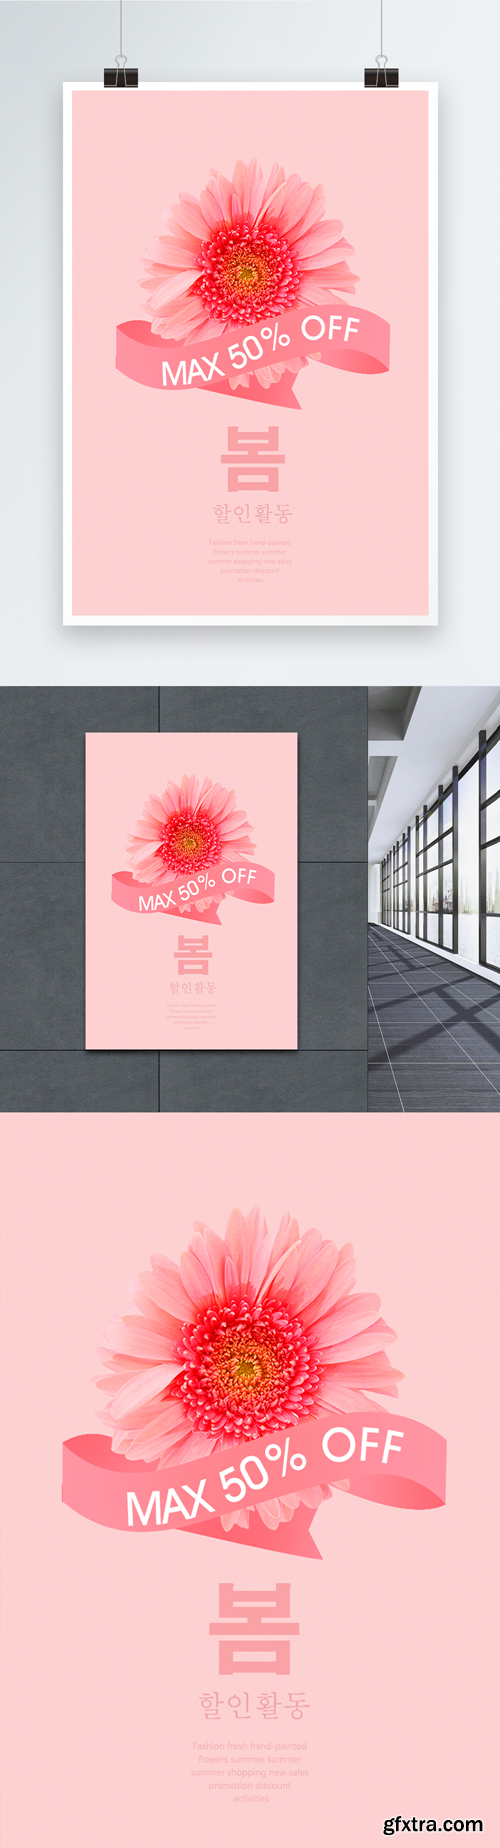 pink flower creative promotional poster